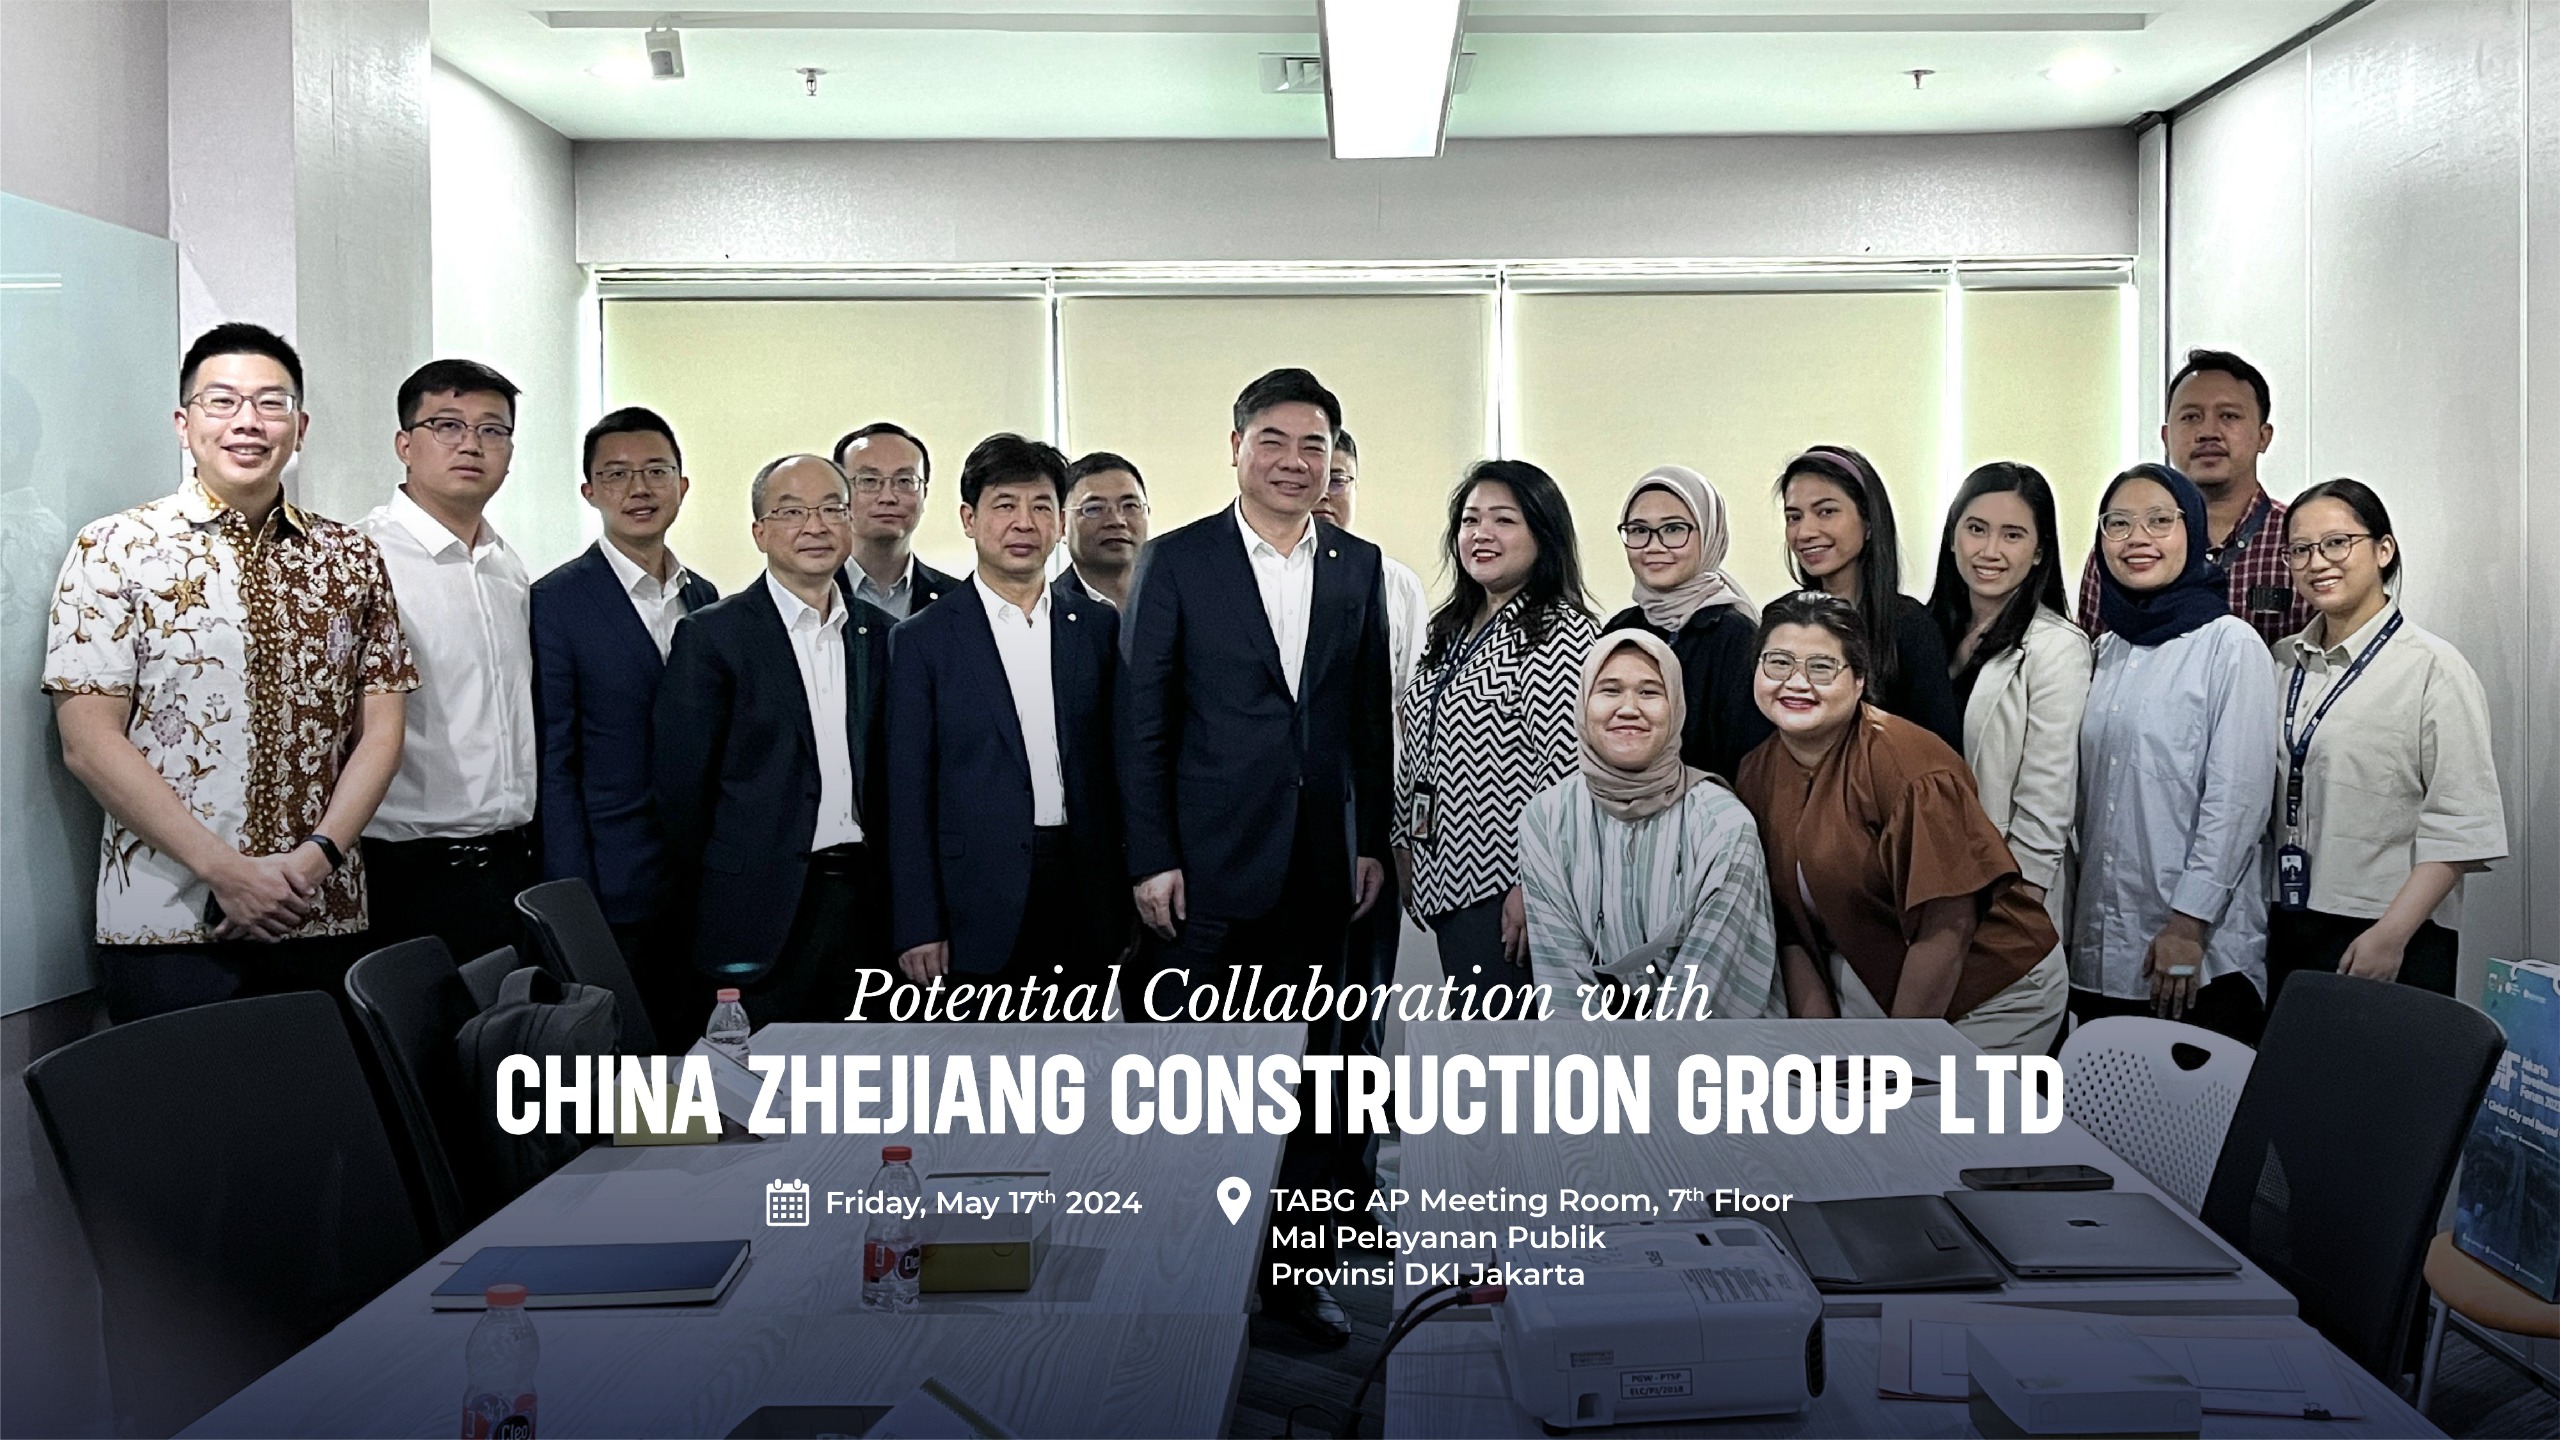 Potential Collaboration with China Zhejiang Construction Group Ltd.